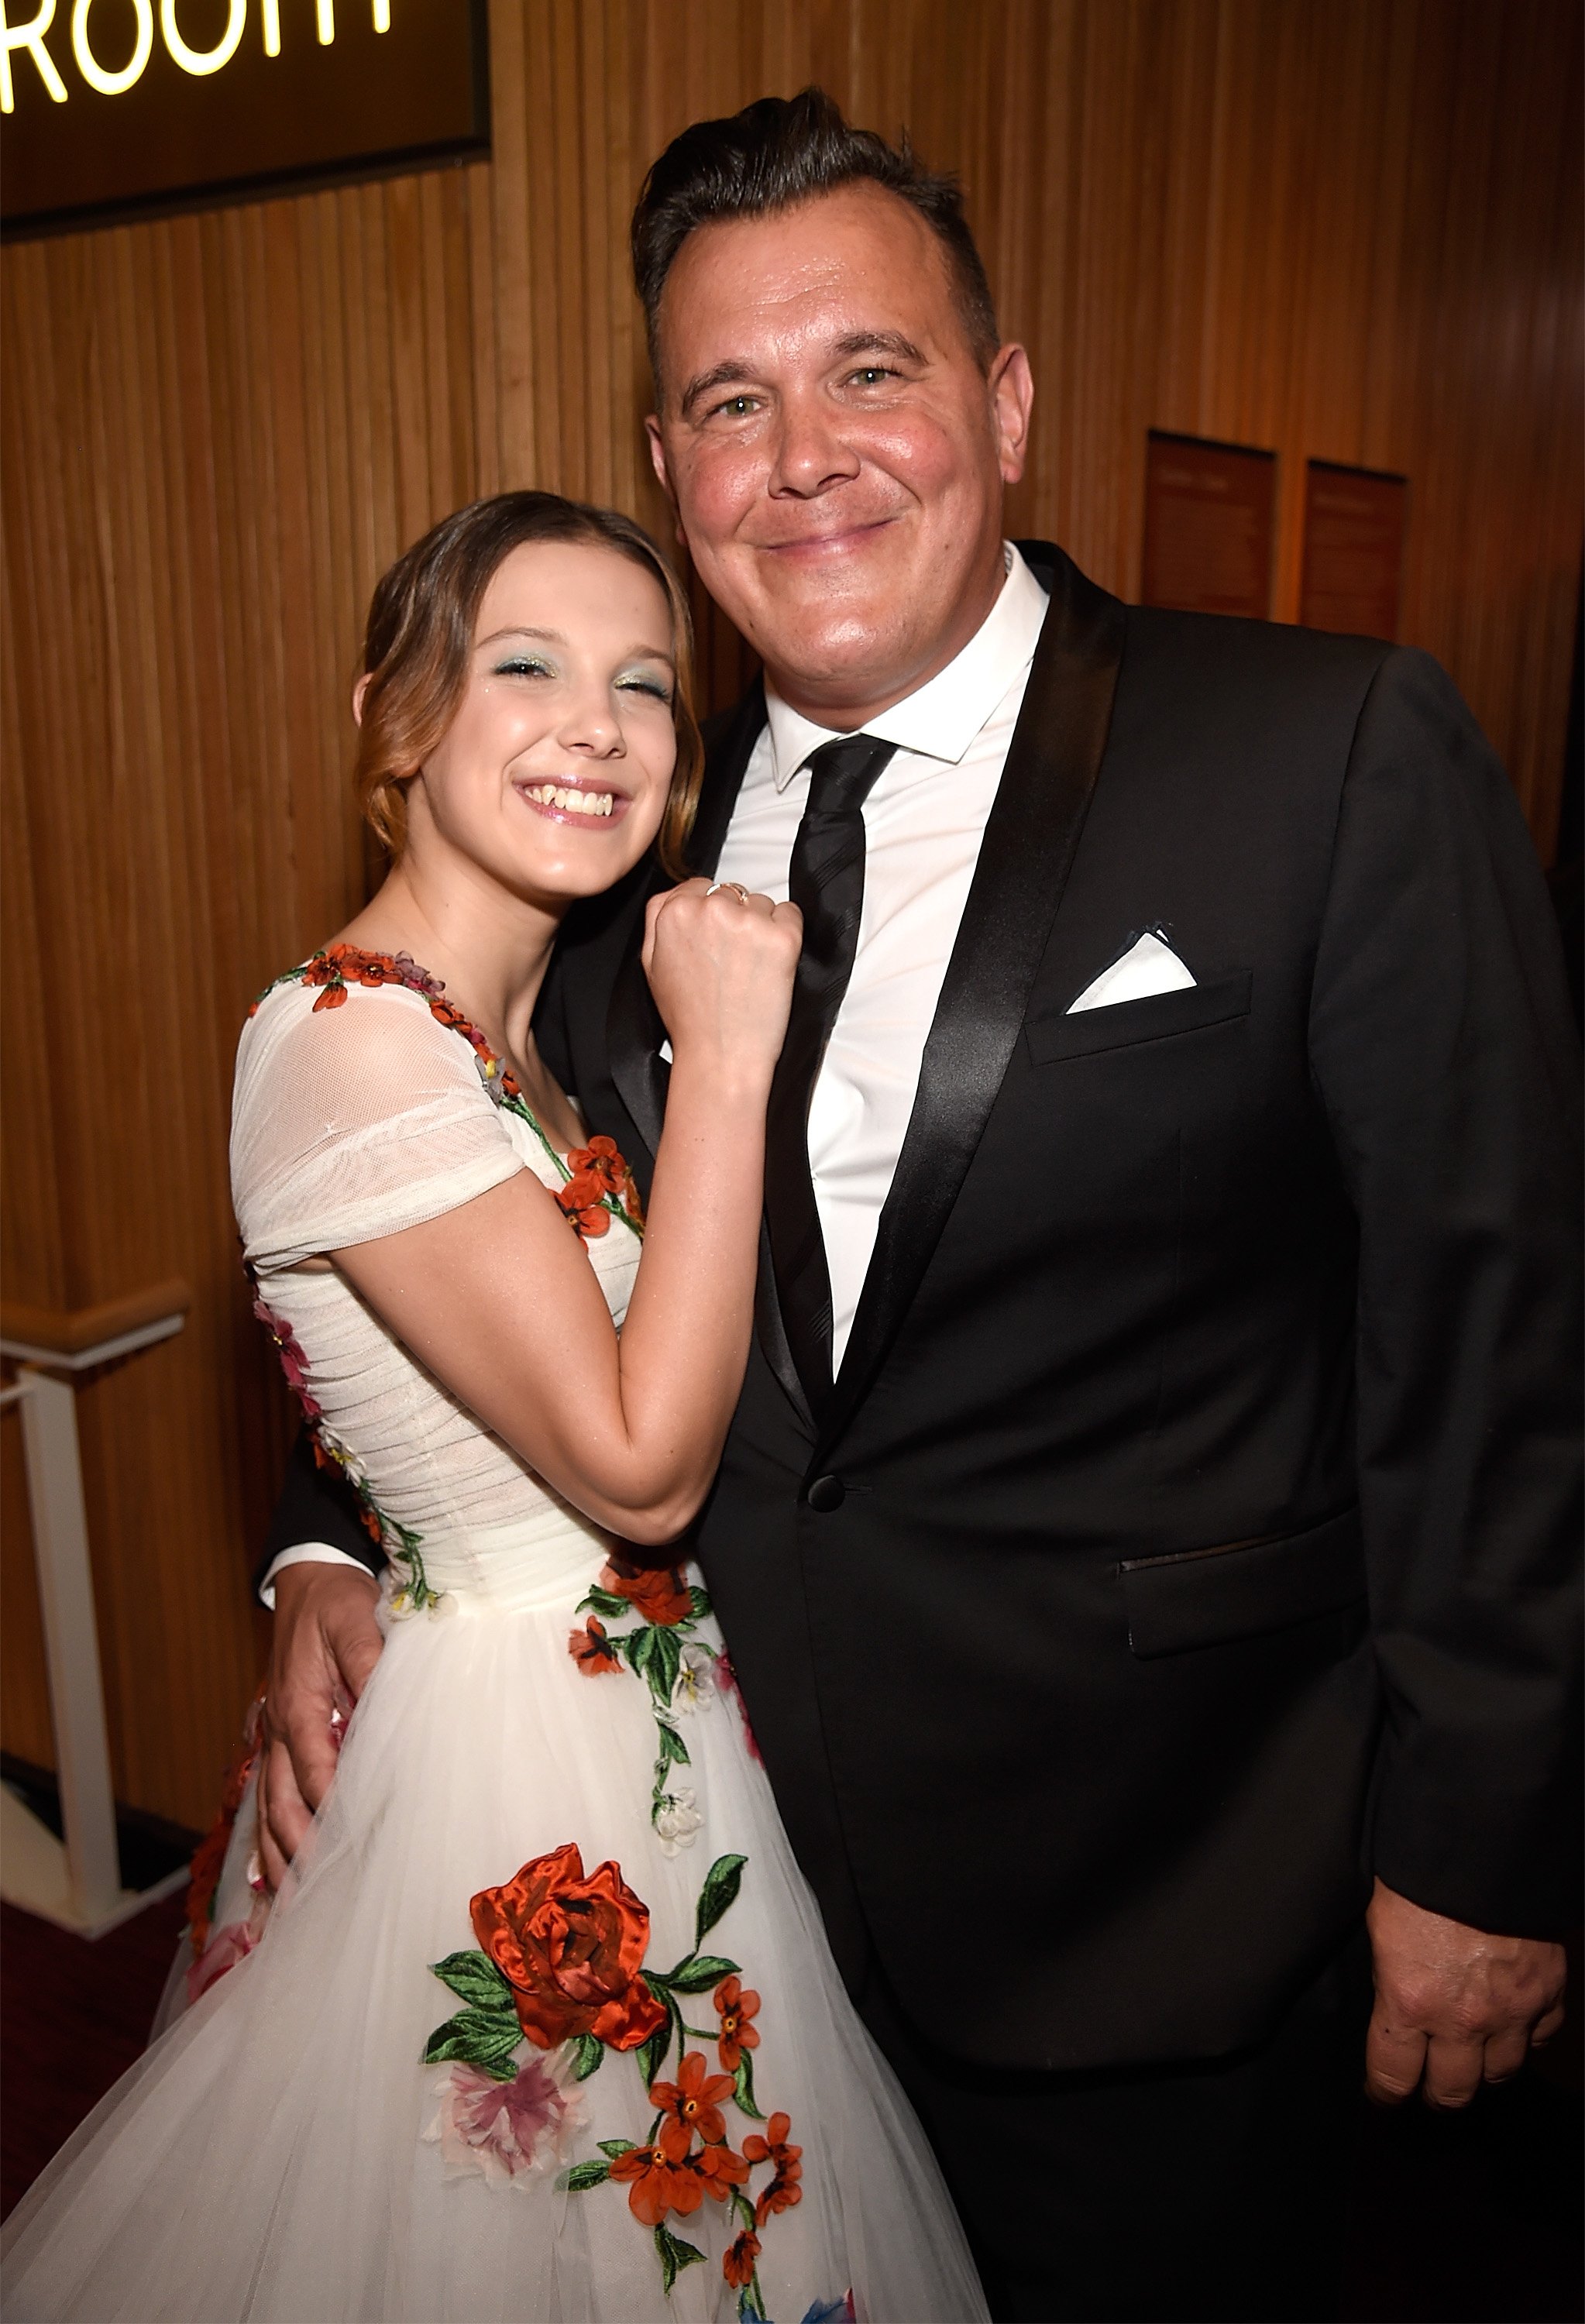 Millie Bobby Brown and Robert Brown attend the 2018 Time 100 Gala at Jazz at Lincoln Center in New York City on April 24, 2018 | Source: Getty Images